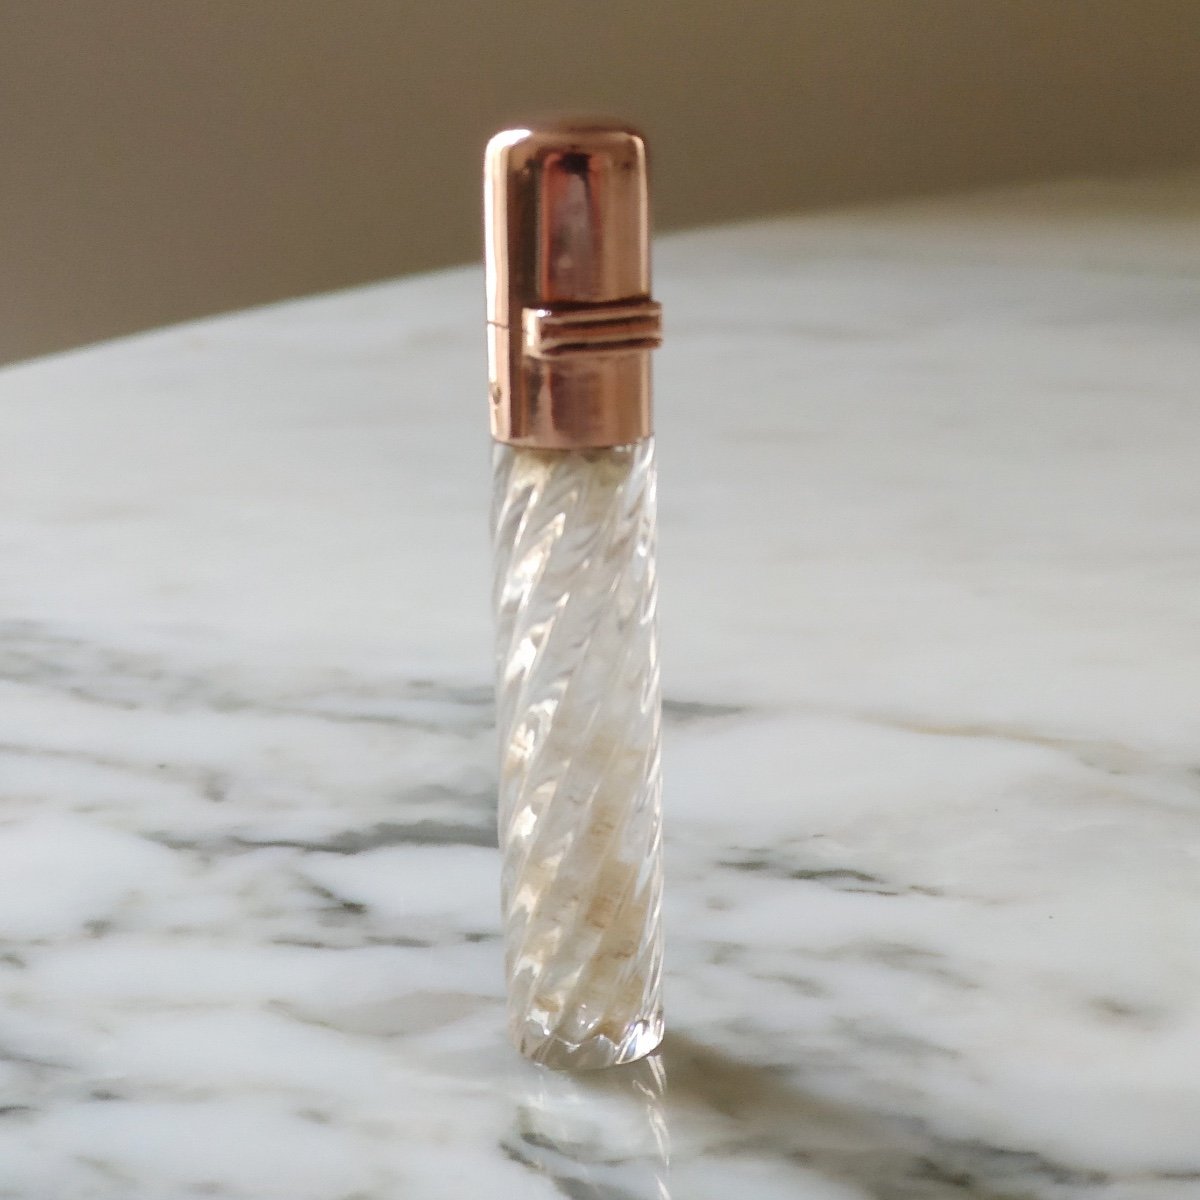 Charming Small Bag Or Pocket Bottle For Perfume, In Crystal And 18k Gold. Salt Salts-photo-3